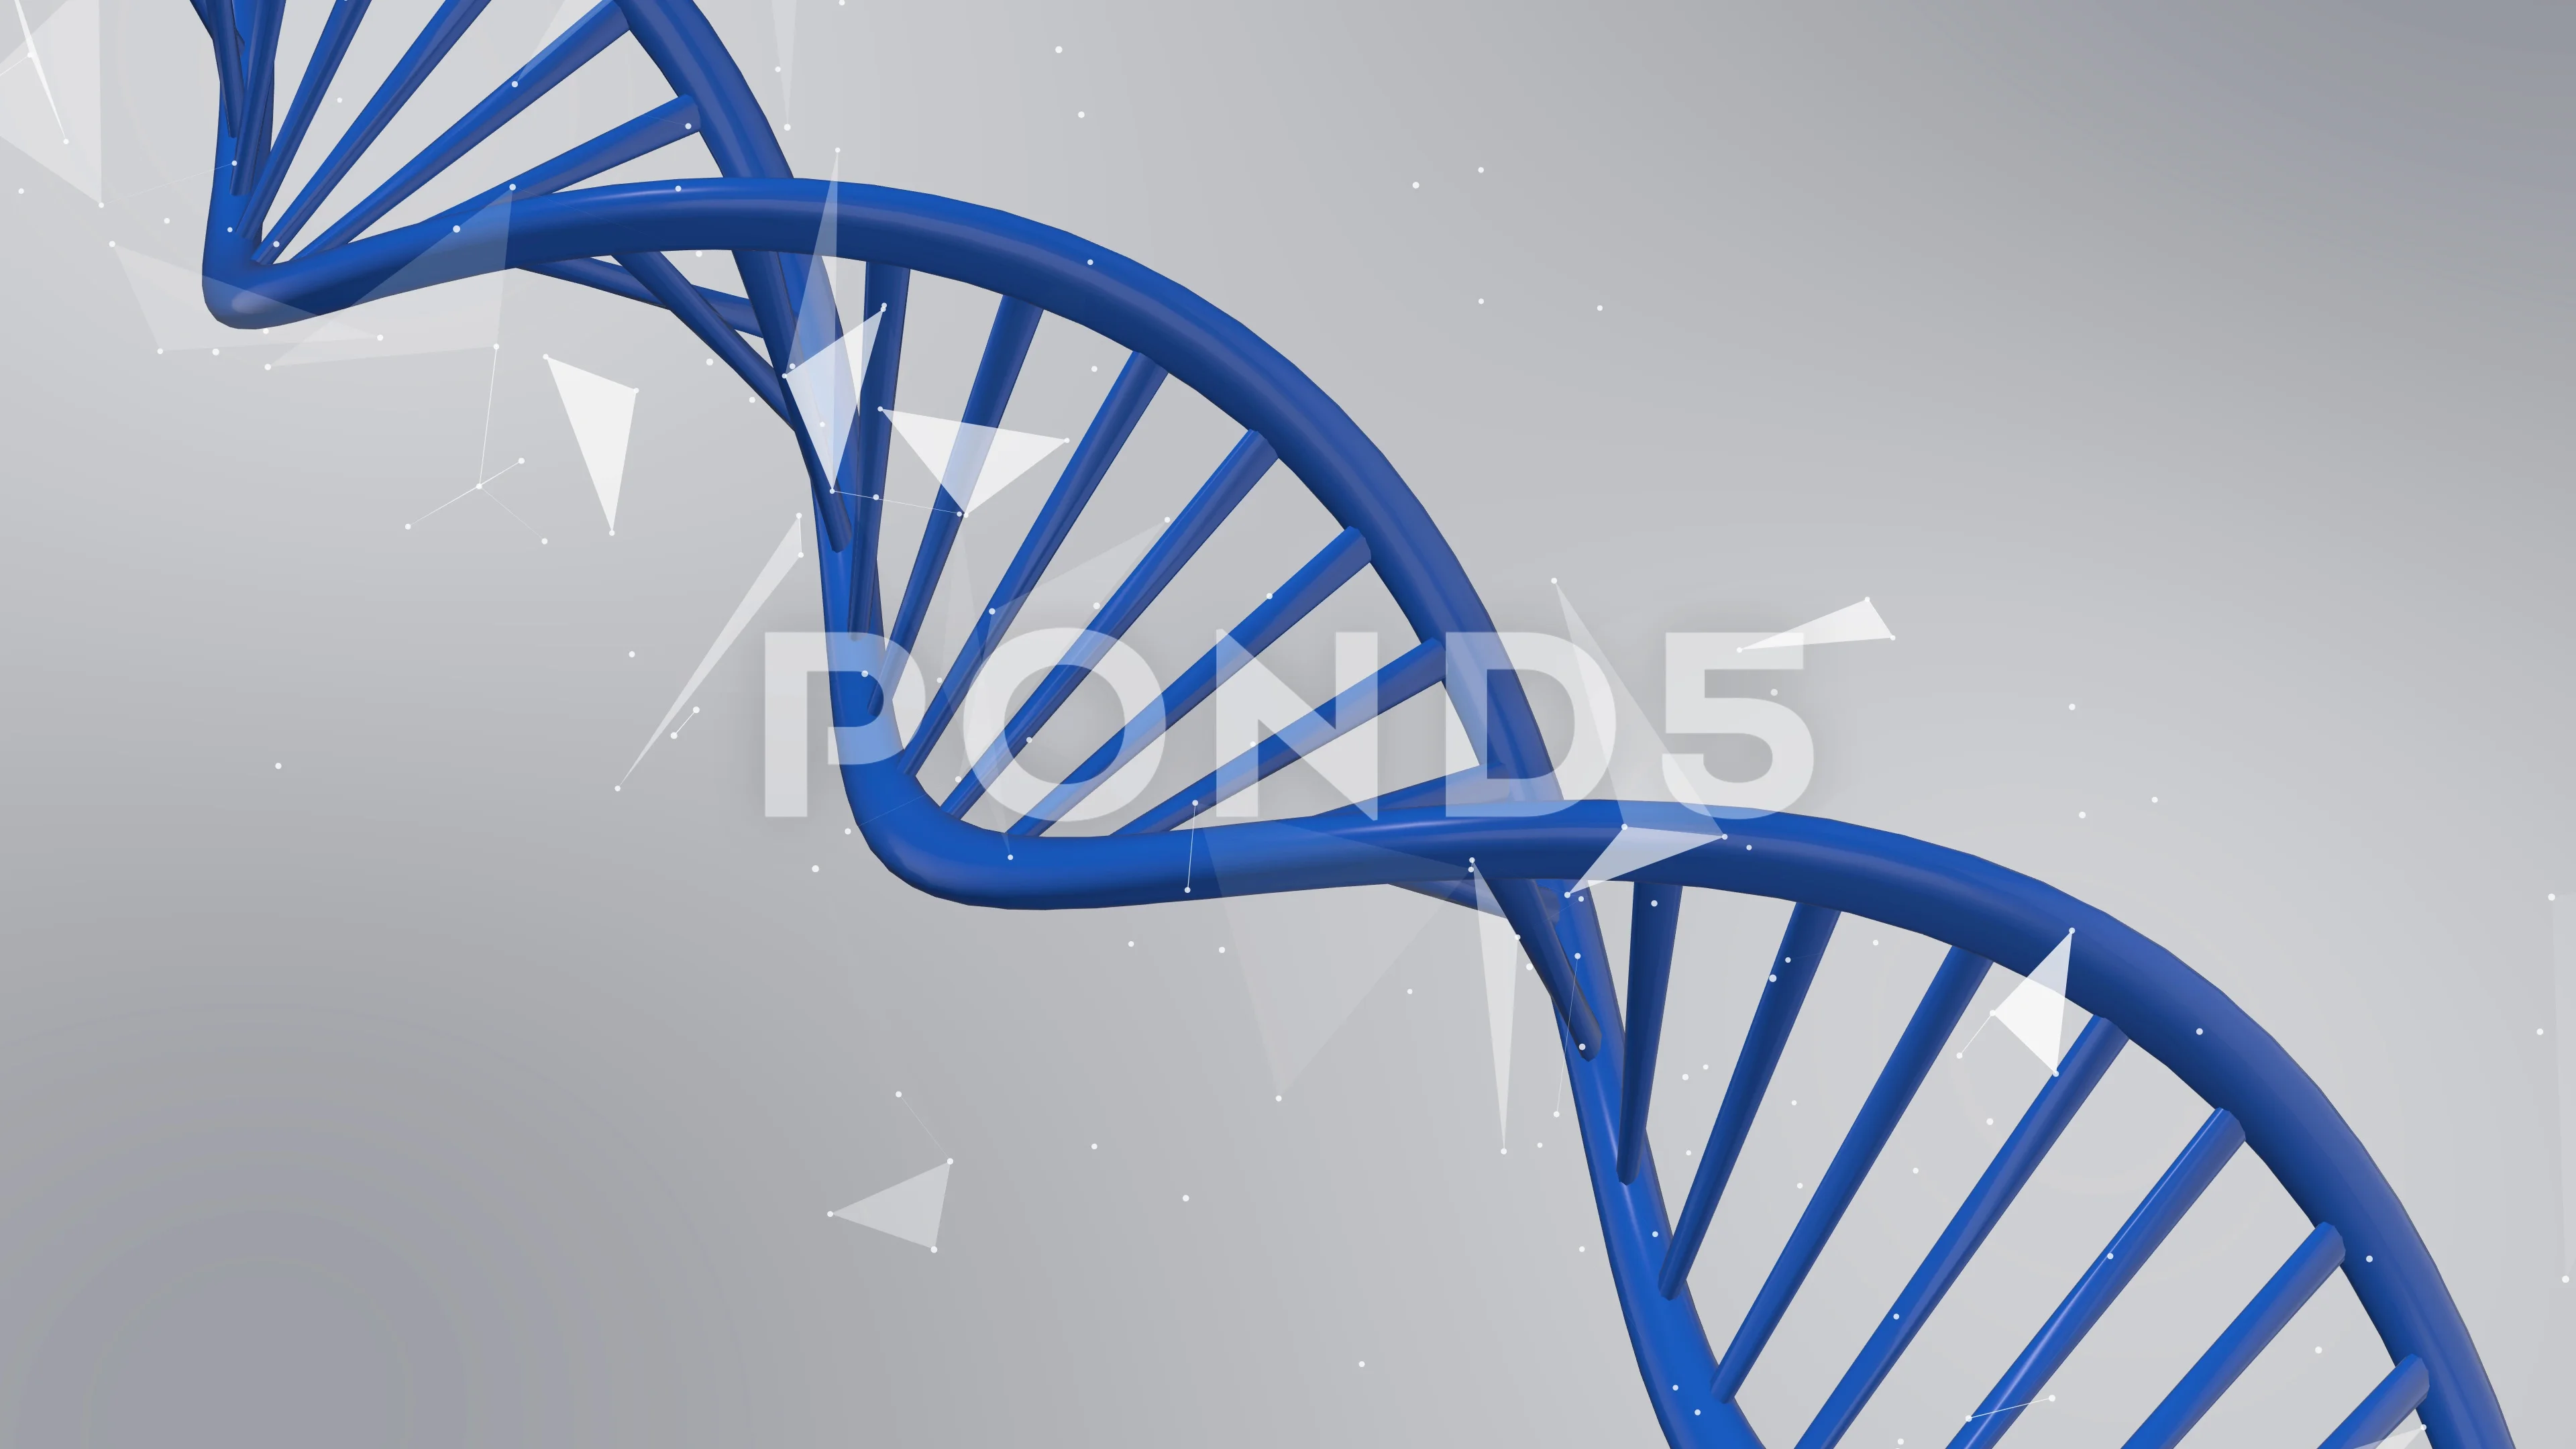 dna clipart animations